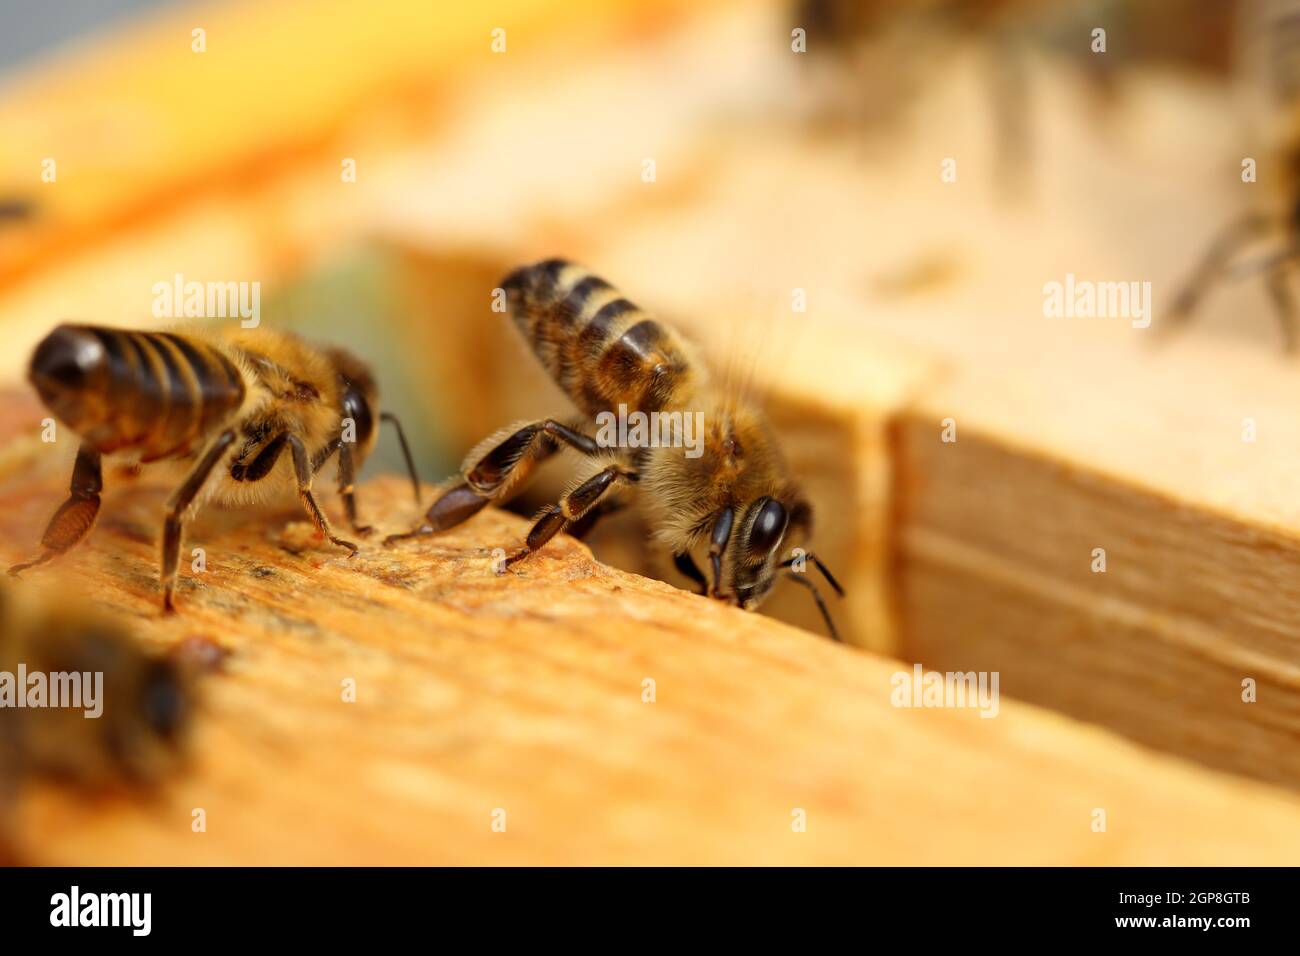 Close up view of two working bees on honey cells. Stock Photo